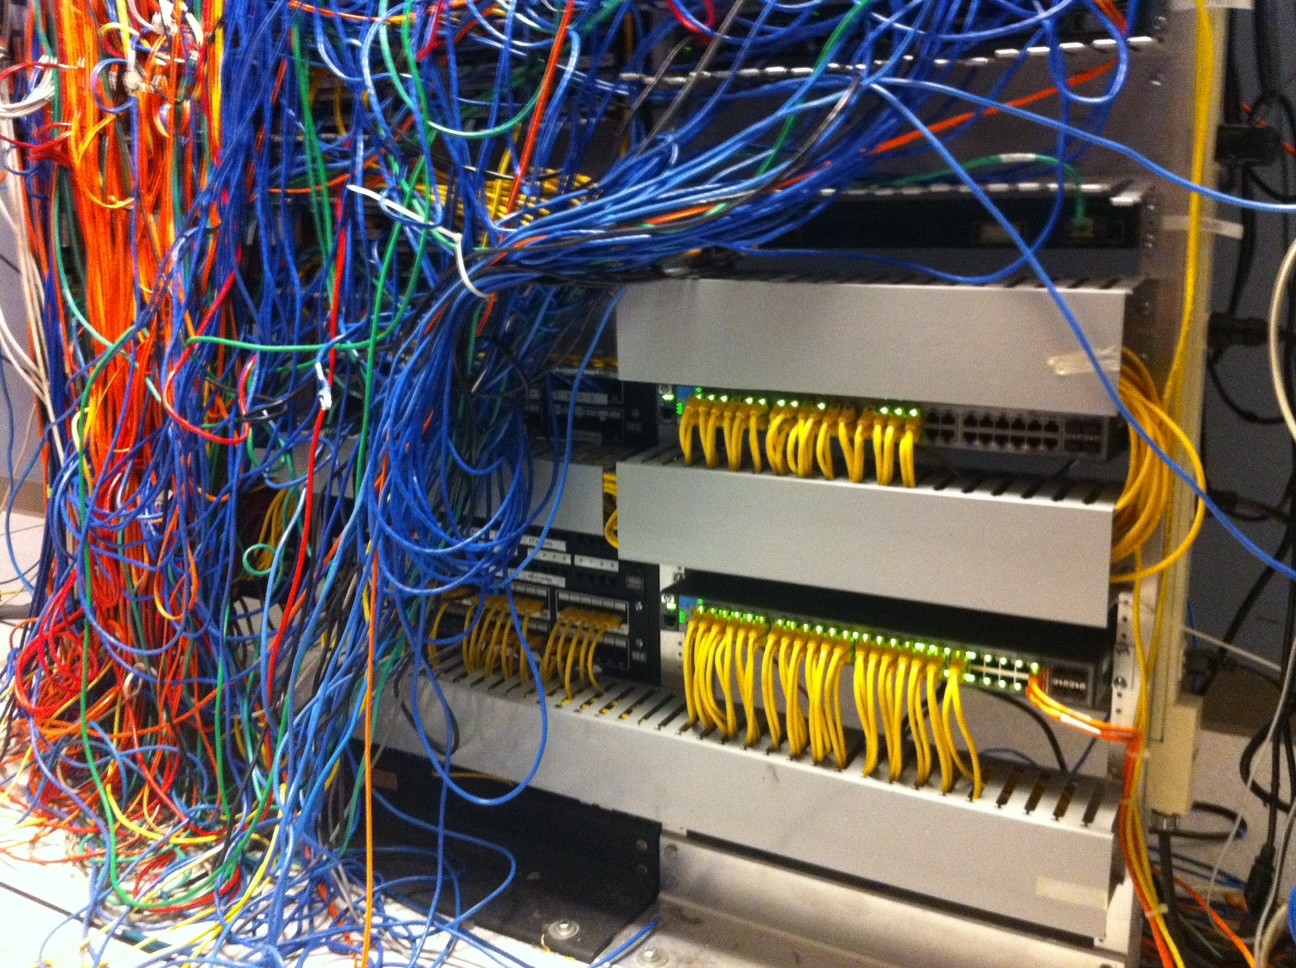 Order from Chaos — Charm City Networks | Baltimore IT Services